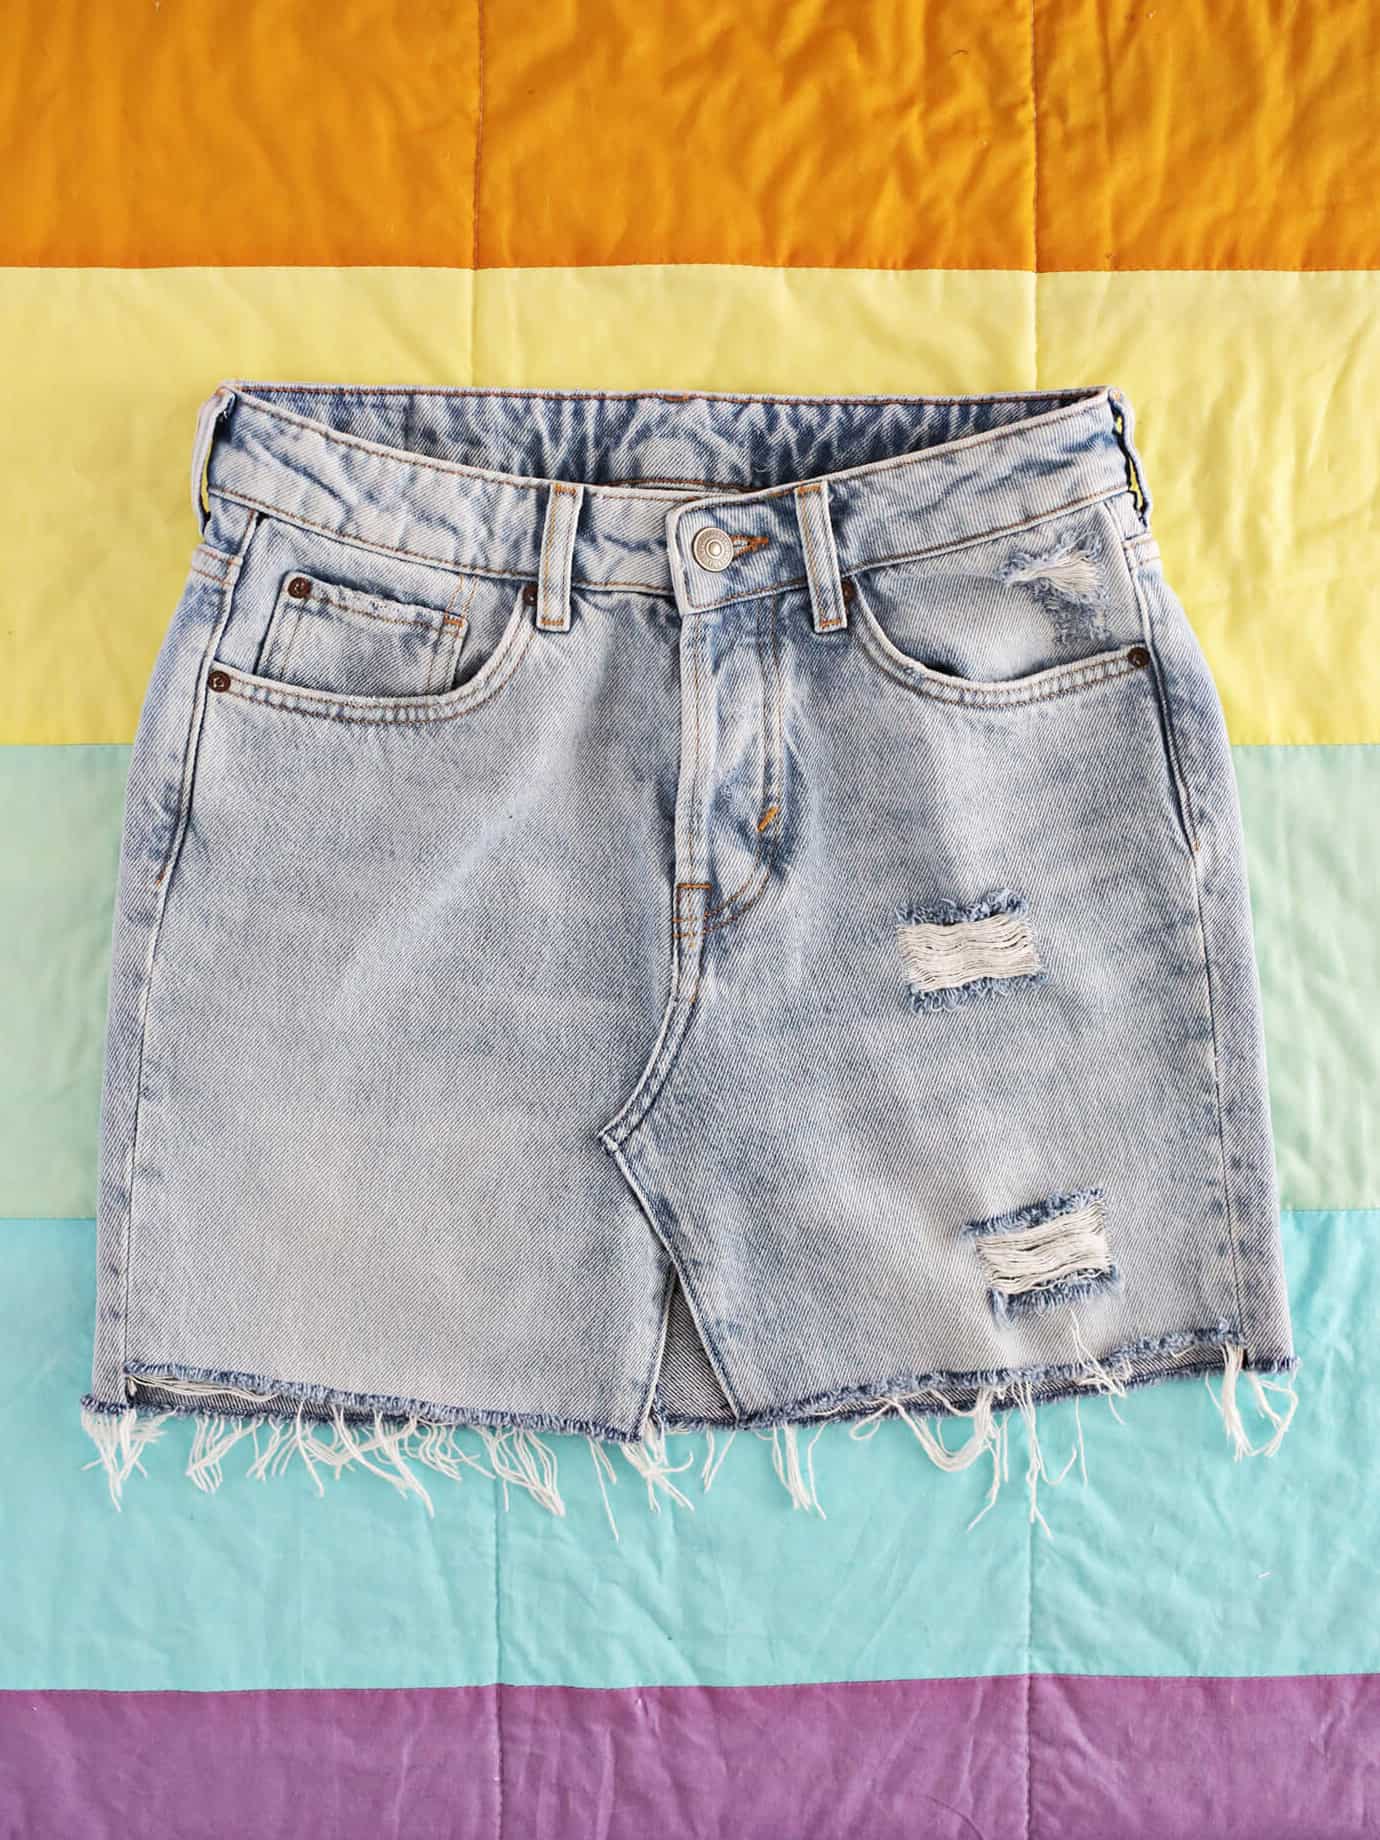 denim skirt out of jeans